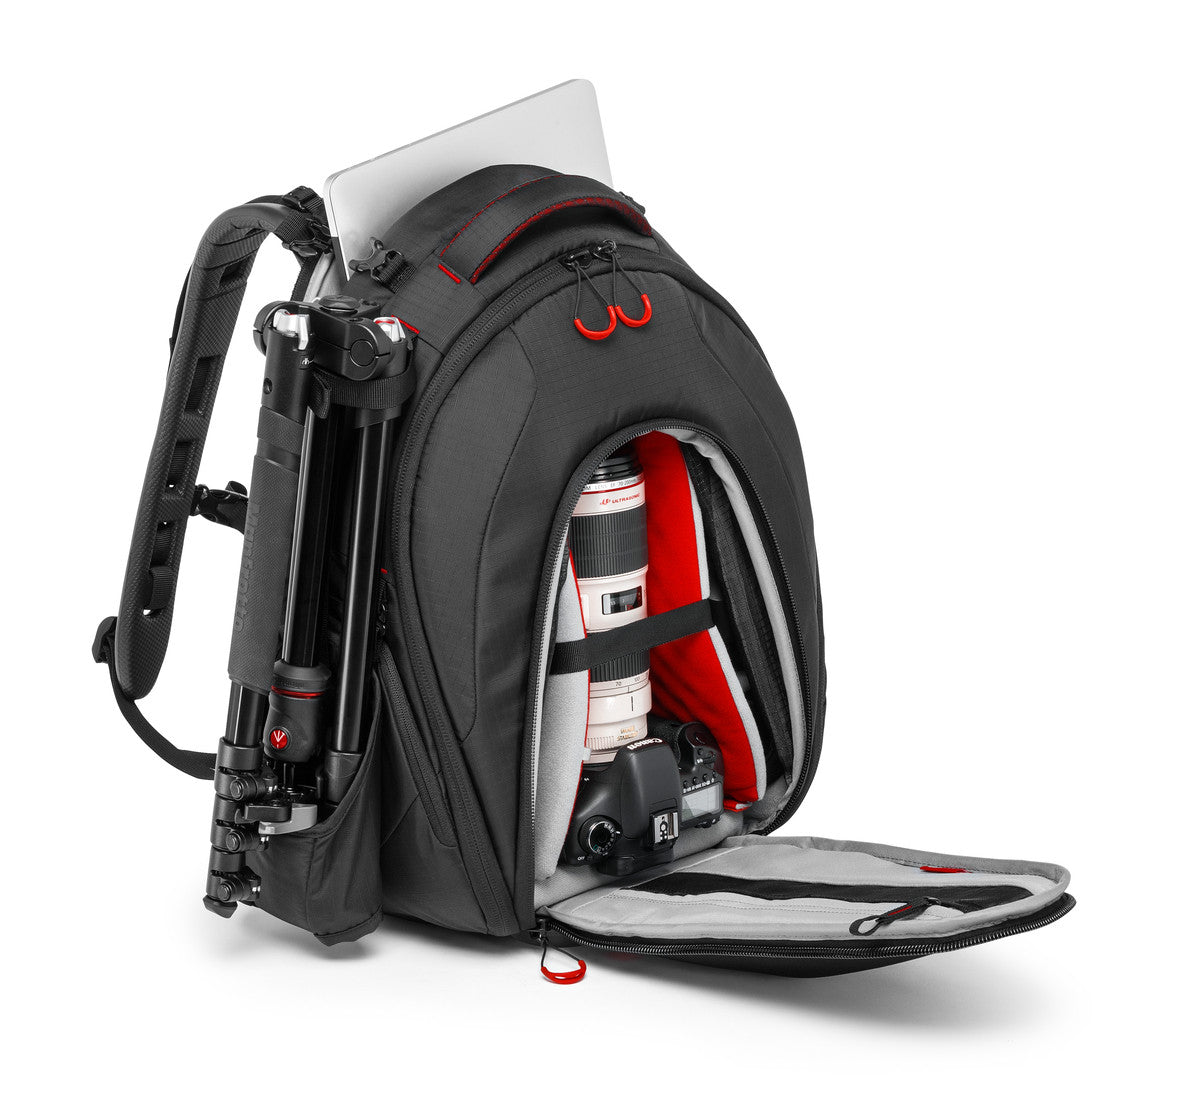 Manfrotto Bug 203 Pro-Light Camera Backpack, bags backpacks, Manfrotto - Pictureline  - 3